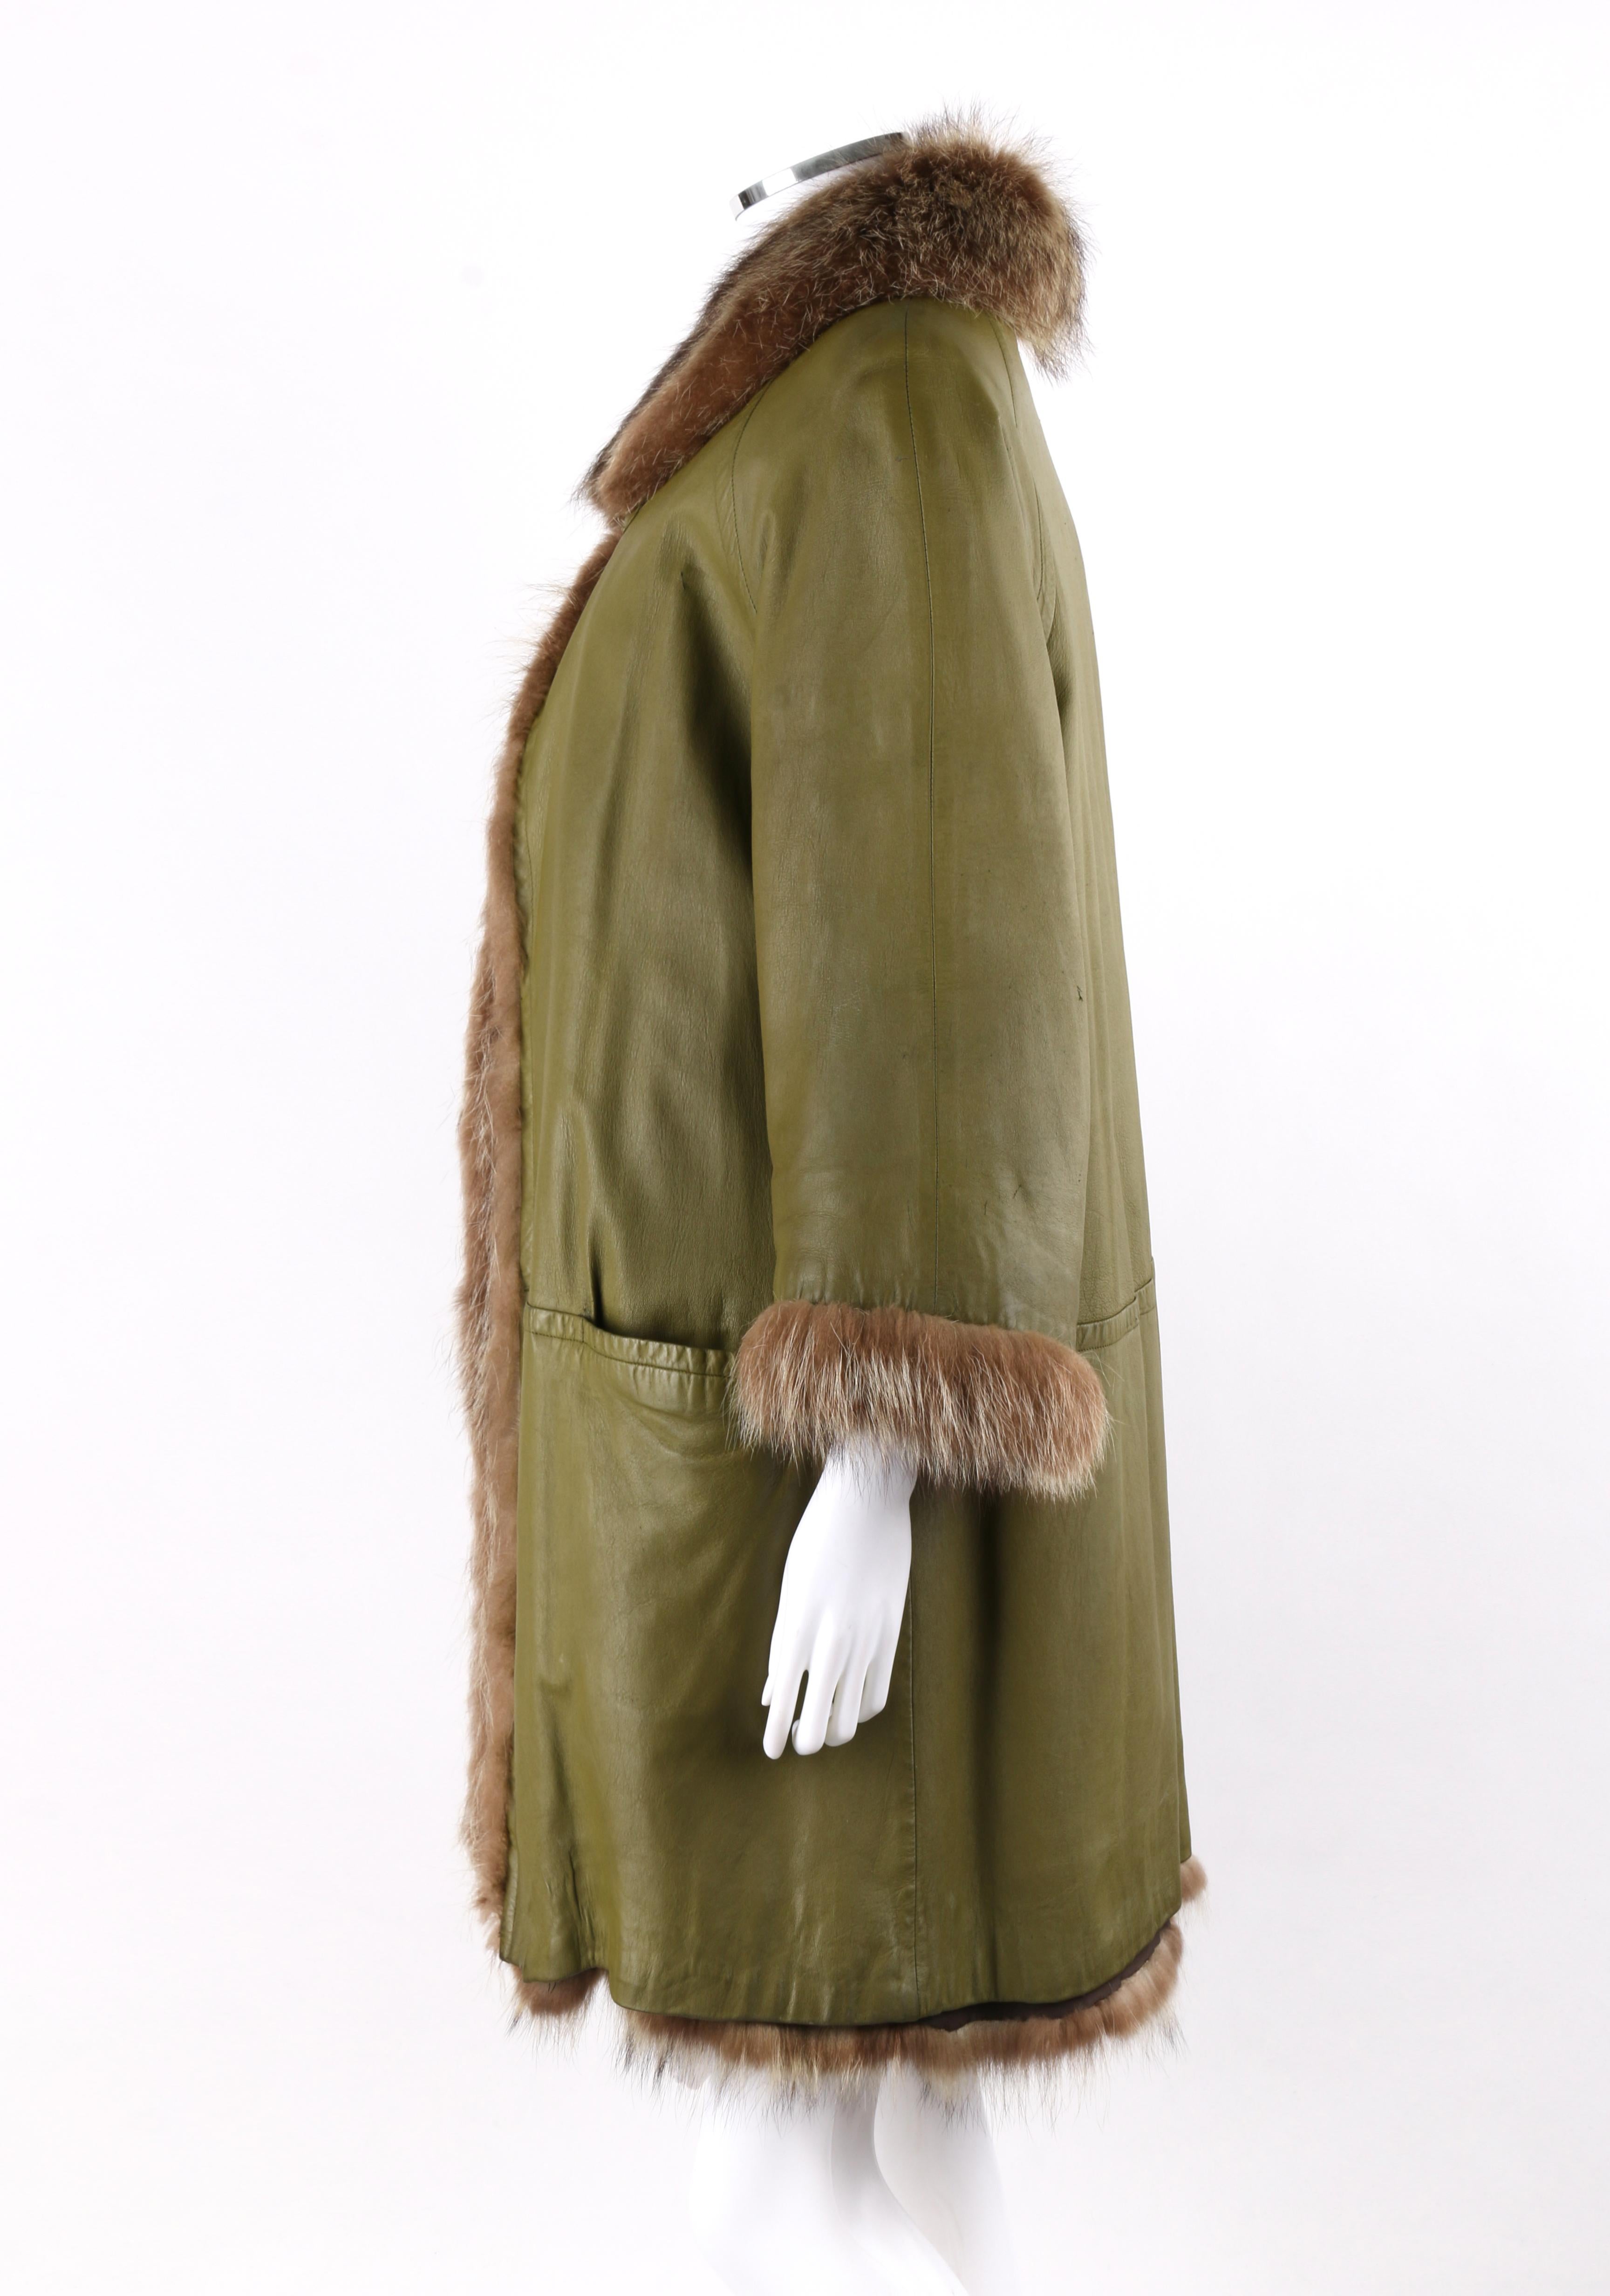 Brown BONNIE CASHIN c.1960’s SILLS & Co. Olive Green Raccoon Fur Leather Mod Overcoat For Sale